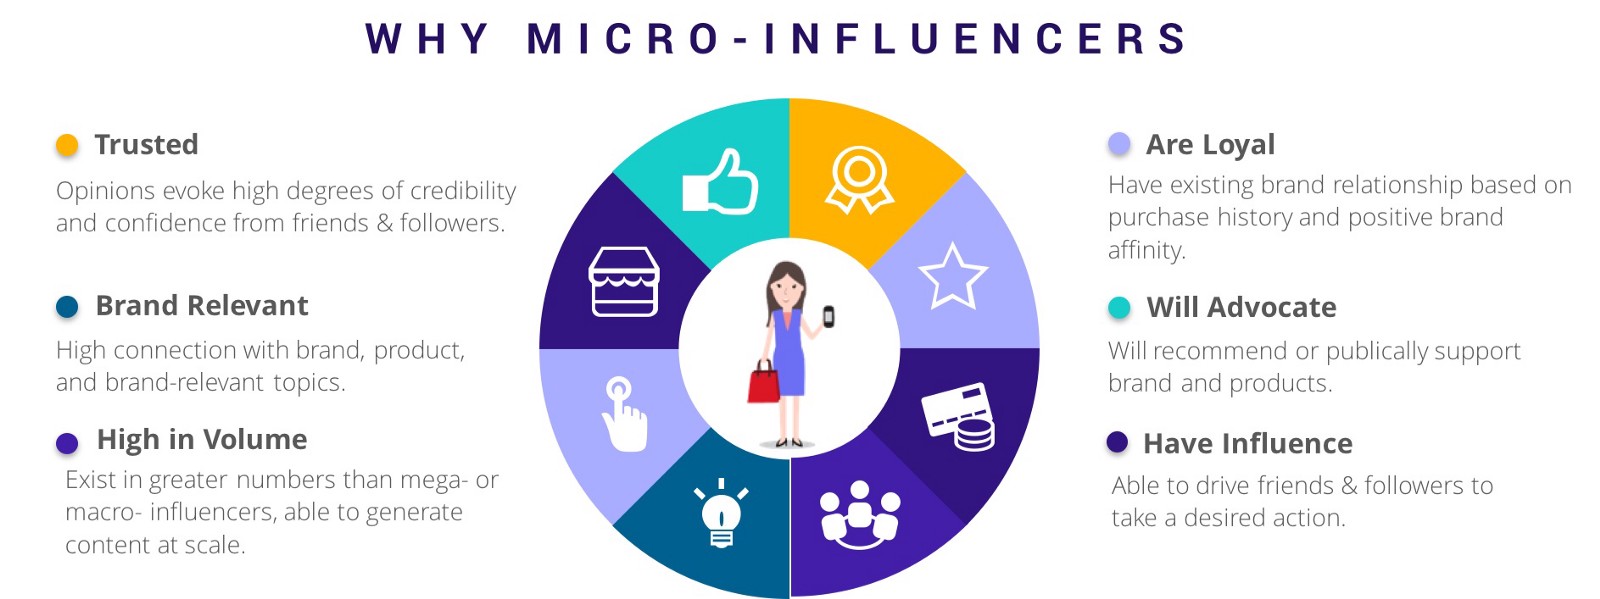 An infographic detailed why micro-influencers are better than larger influencers.